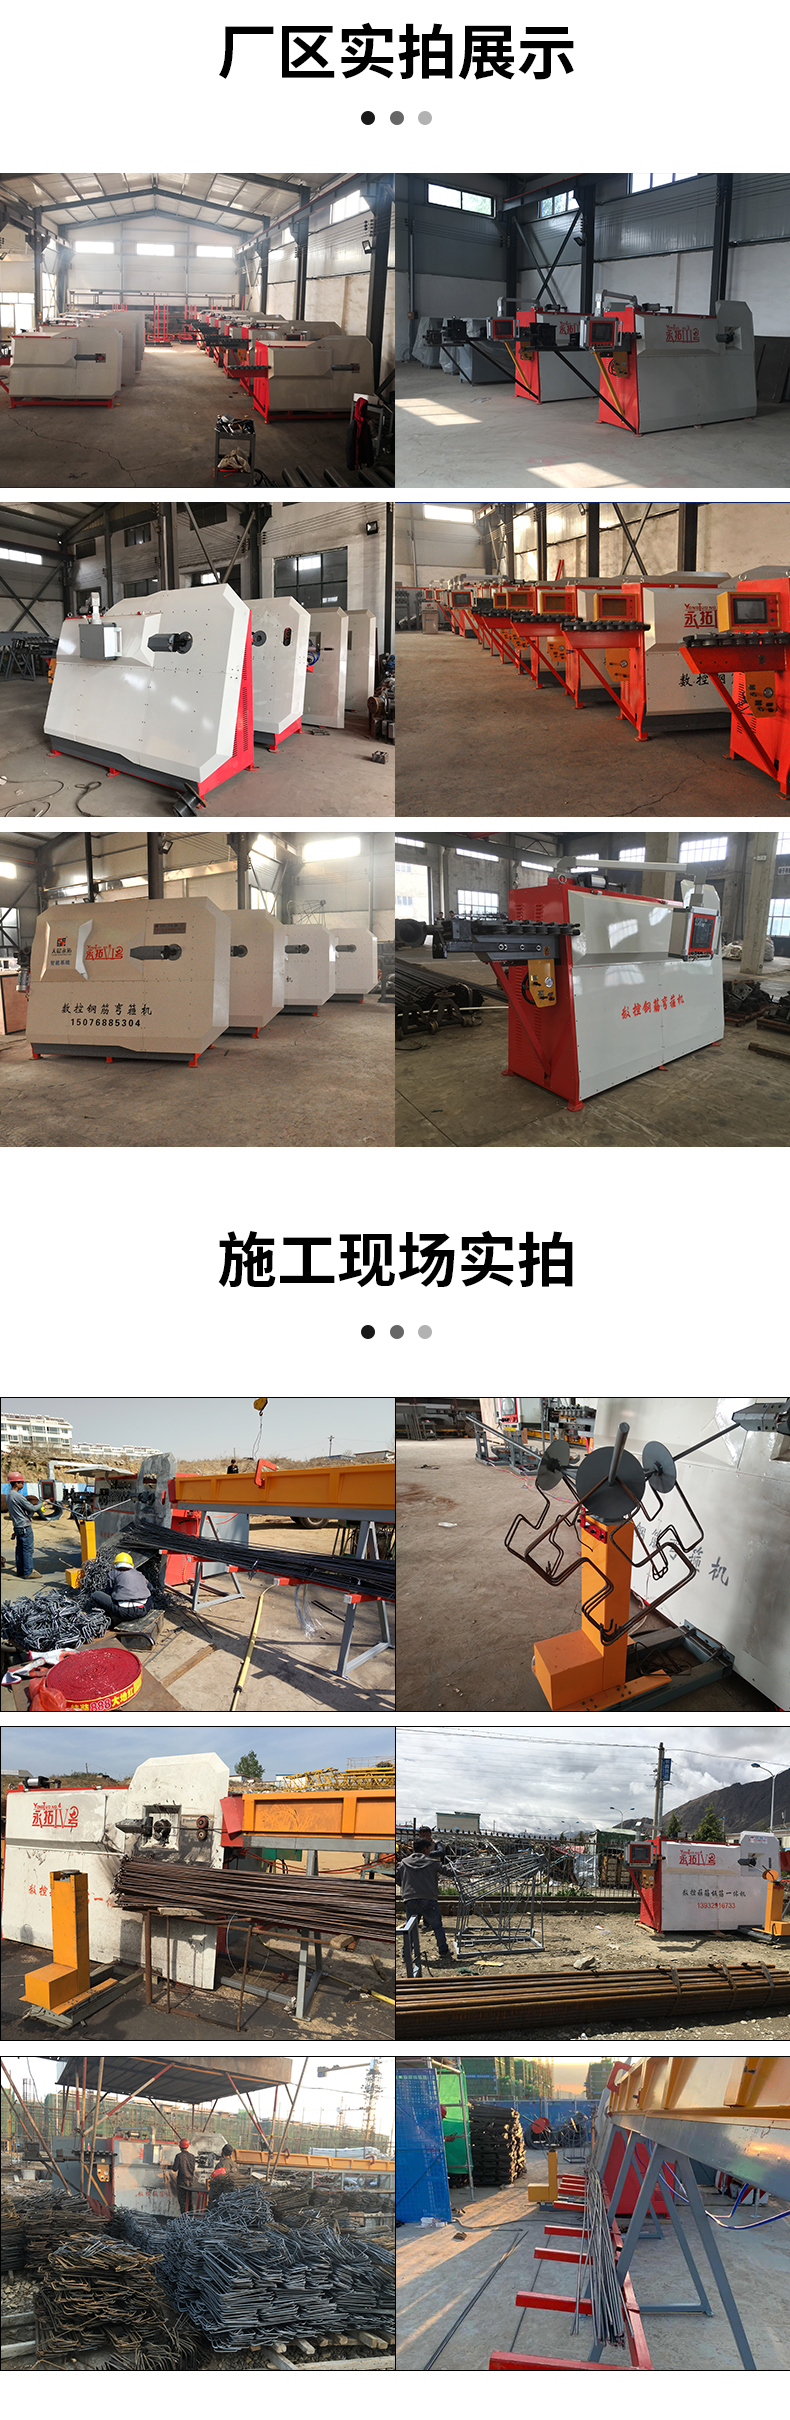 Large curved straightening steel bar bending and hoop cutting machine Yongtuo No.7 fully automatic steel bar bending and hoop cutting machine